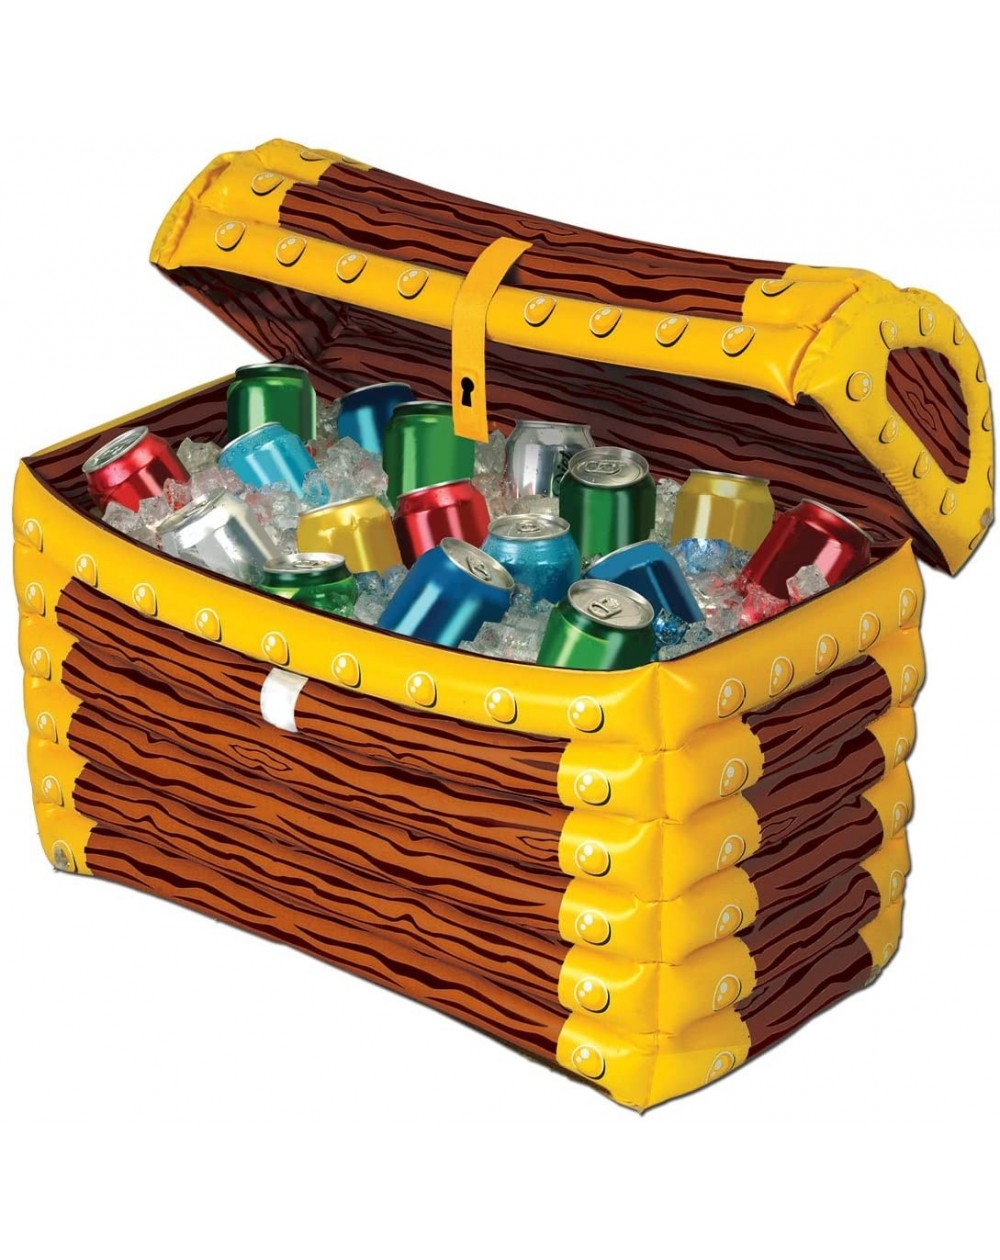 Tableware Inflatable Treasure Chest Cooler (holds apprx 48 12-Oz cans) Party Accessory (1 count) (1/Pkg) - CK113WGCYUP $27.65